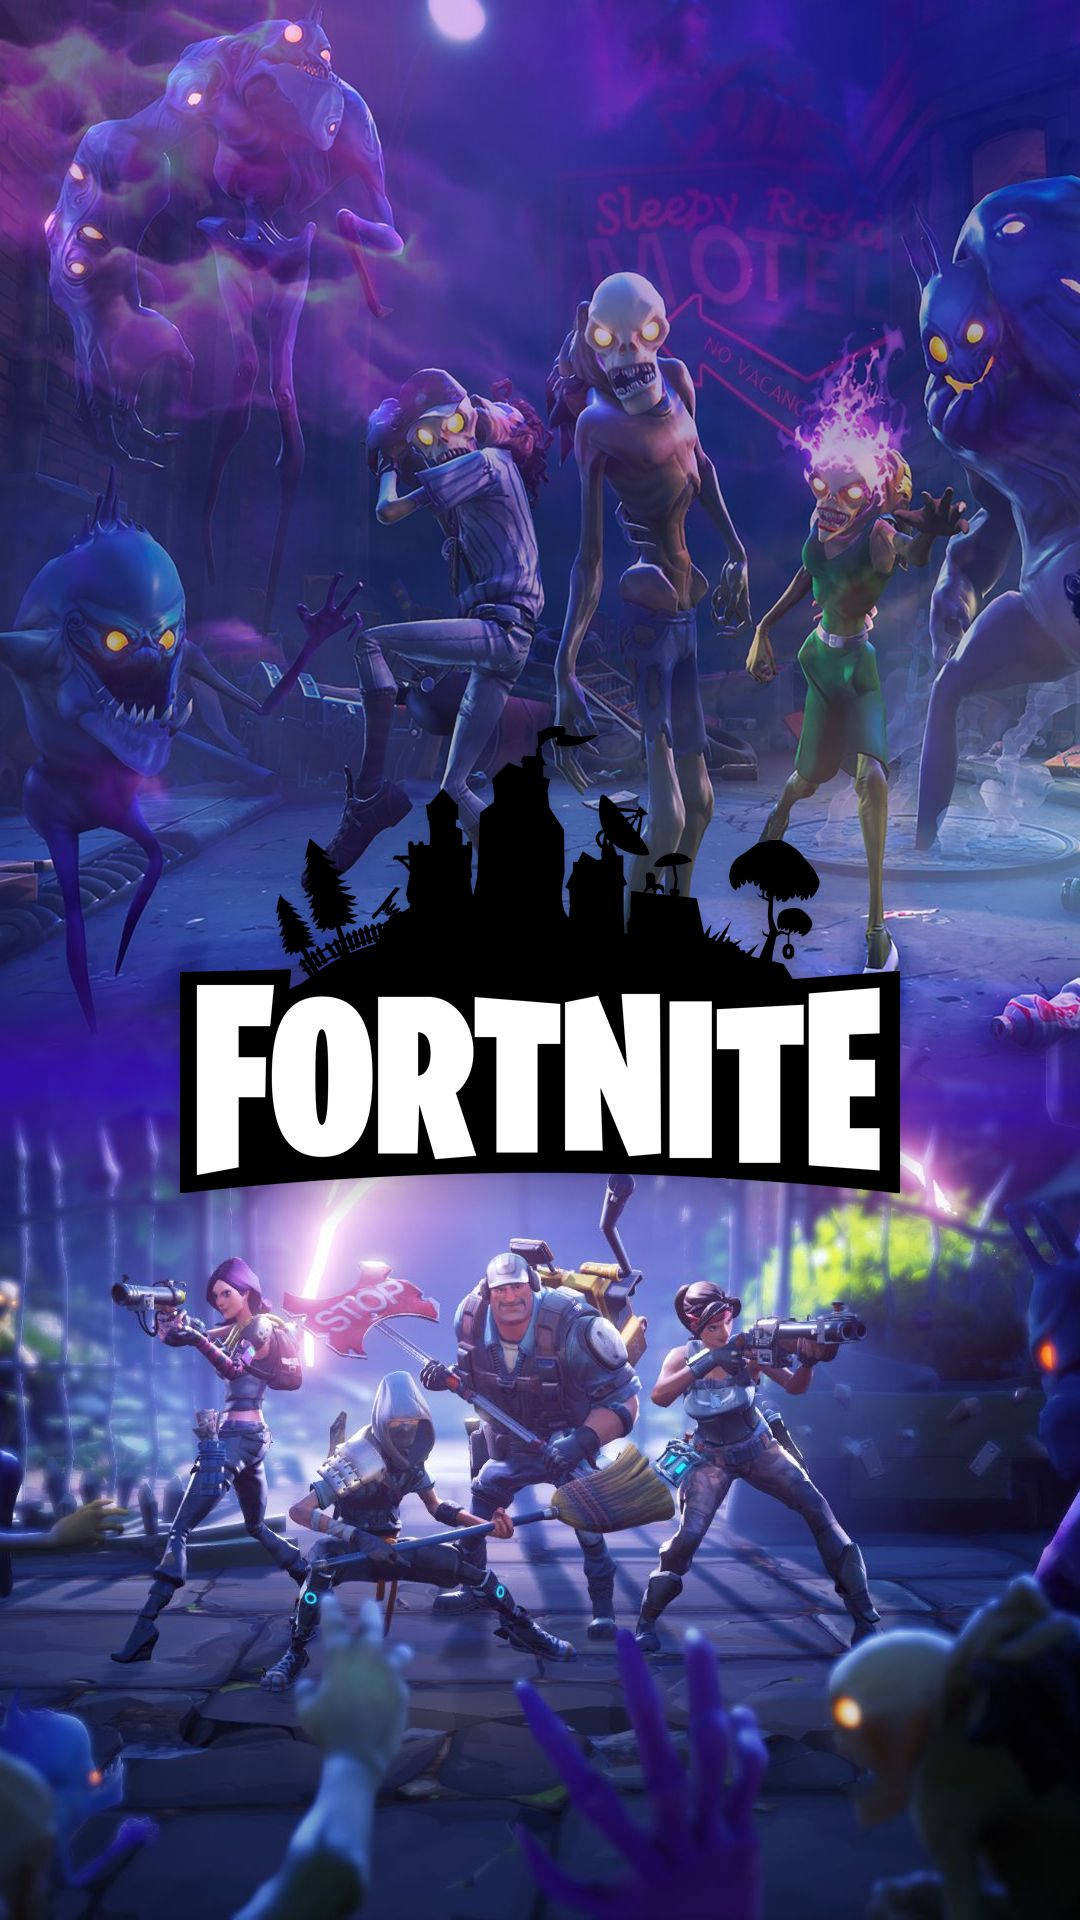 Don't Get Too Close To The Zombie Horde In Fortnite Wallpaper